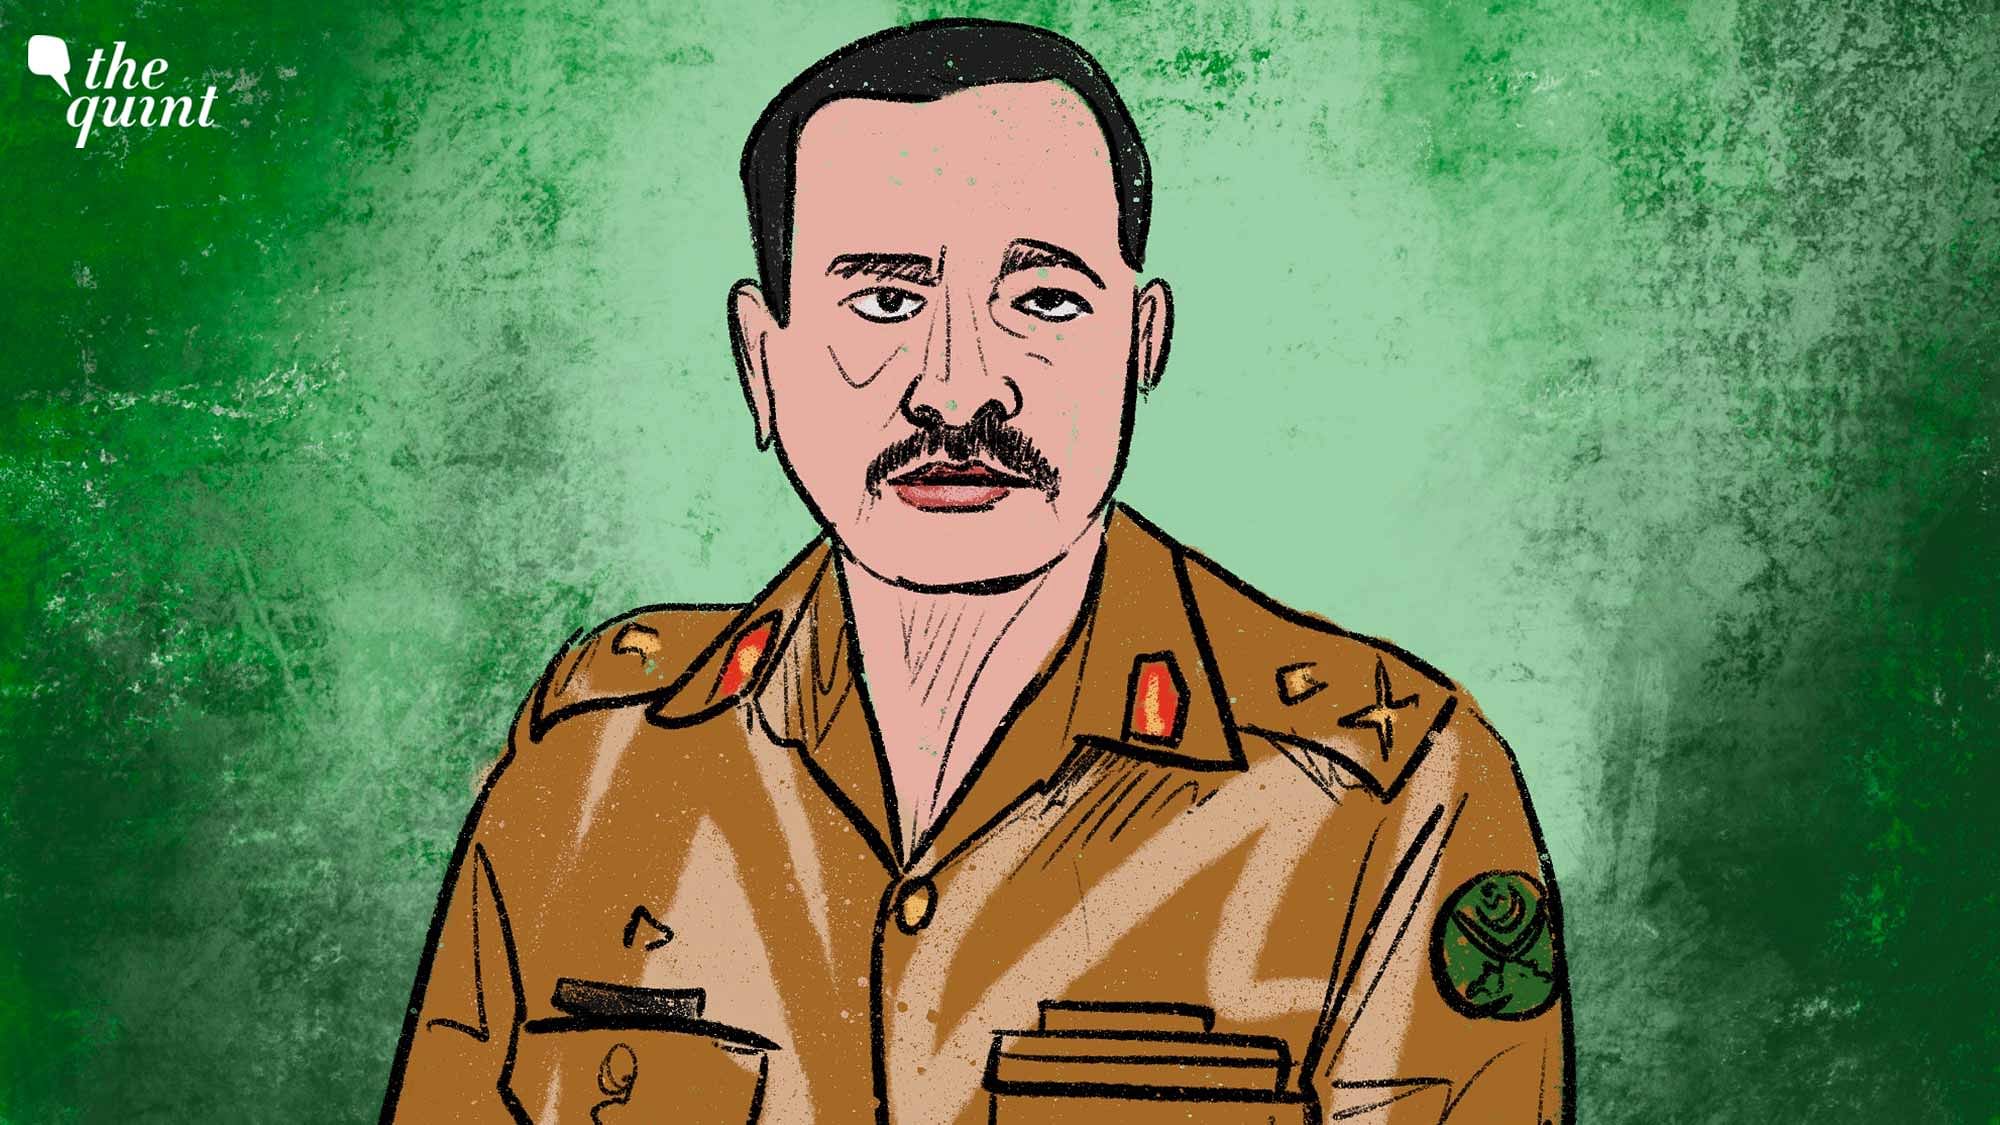 <div class="paragraphs"><p><a href="https://www.thequint.com/news/world/pakistan-appoints-former-isi-chief-lt-general-asim-munir-as-head-of-the-army">Asim Munir</a> is  a recipient of&nbsp; 'Sword of Honour', a 'Hafiz-e-Quran', a former head of Pakistan's notorious spy agency&nbsp; ISI, the man who locked horns with then-prime minister Imran Khan, and a close aide of the outgoing army chief, <a href="https://www.thequint.com/voices/opinion/should-india-worry-about-signals-from-pakistan-army-chiefs-visit-to-the-us">General Qamar Javed Bajwa</a>.</p></div>